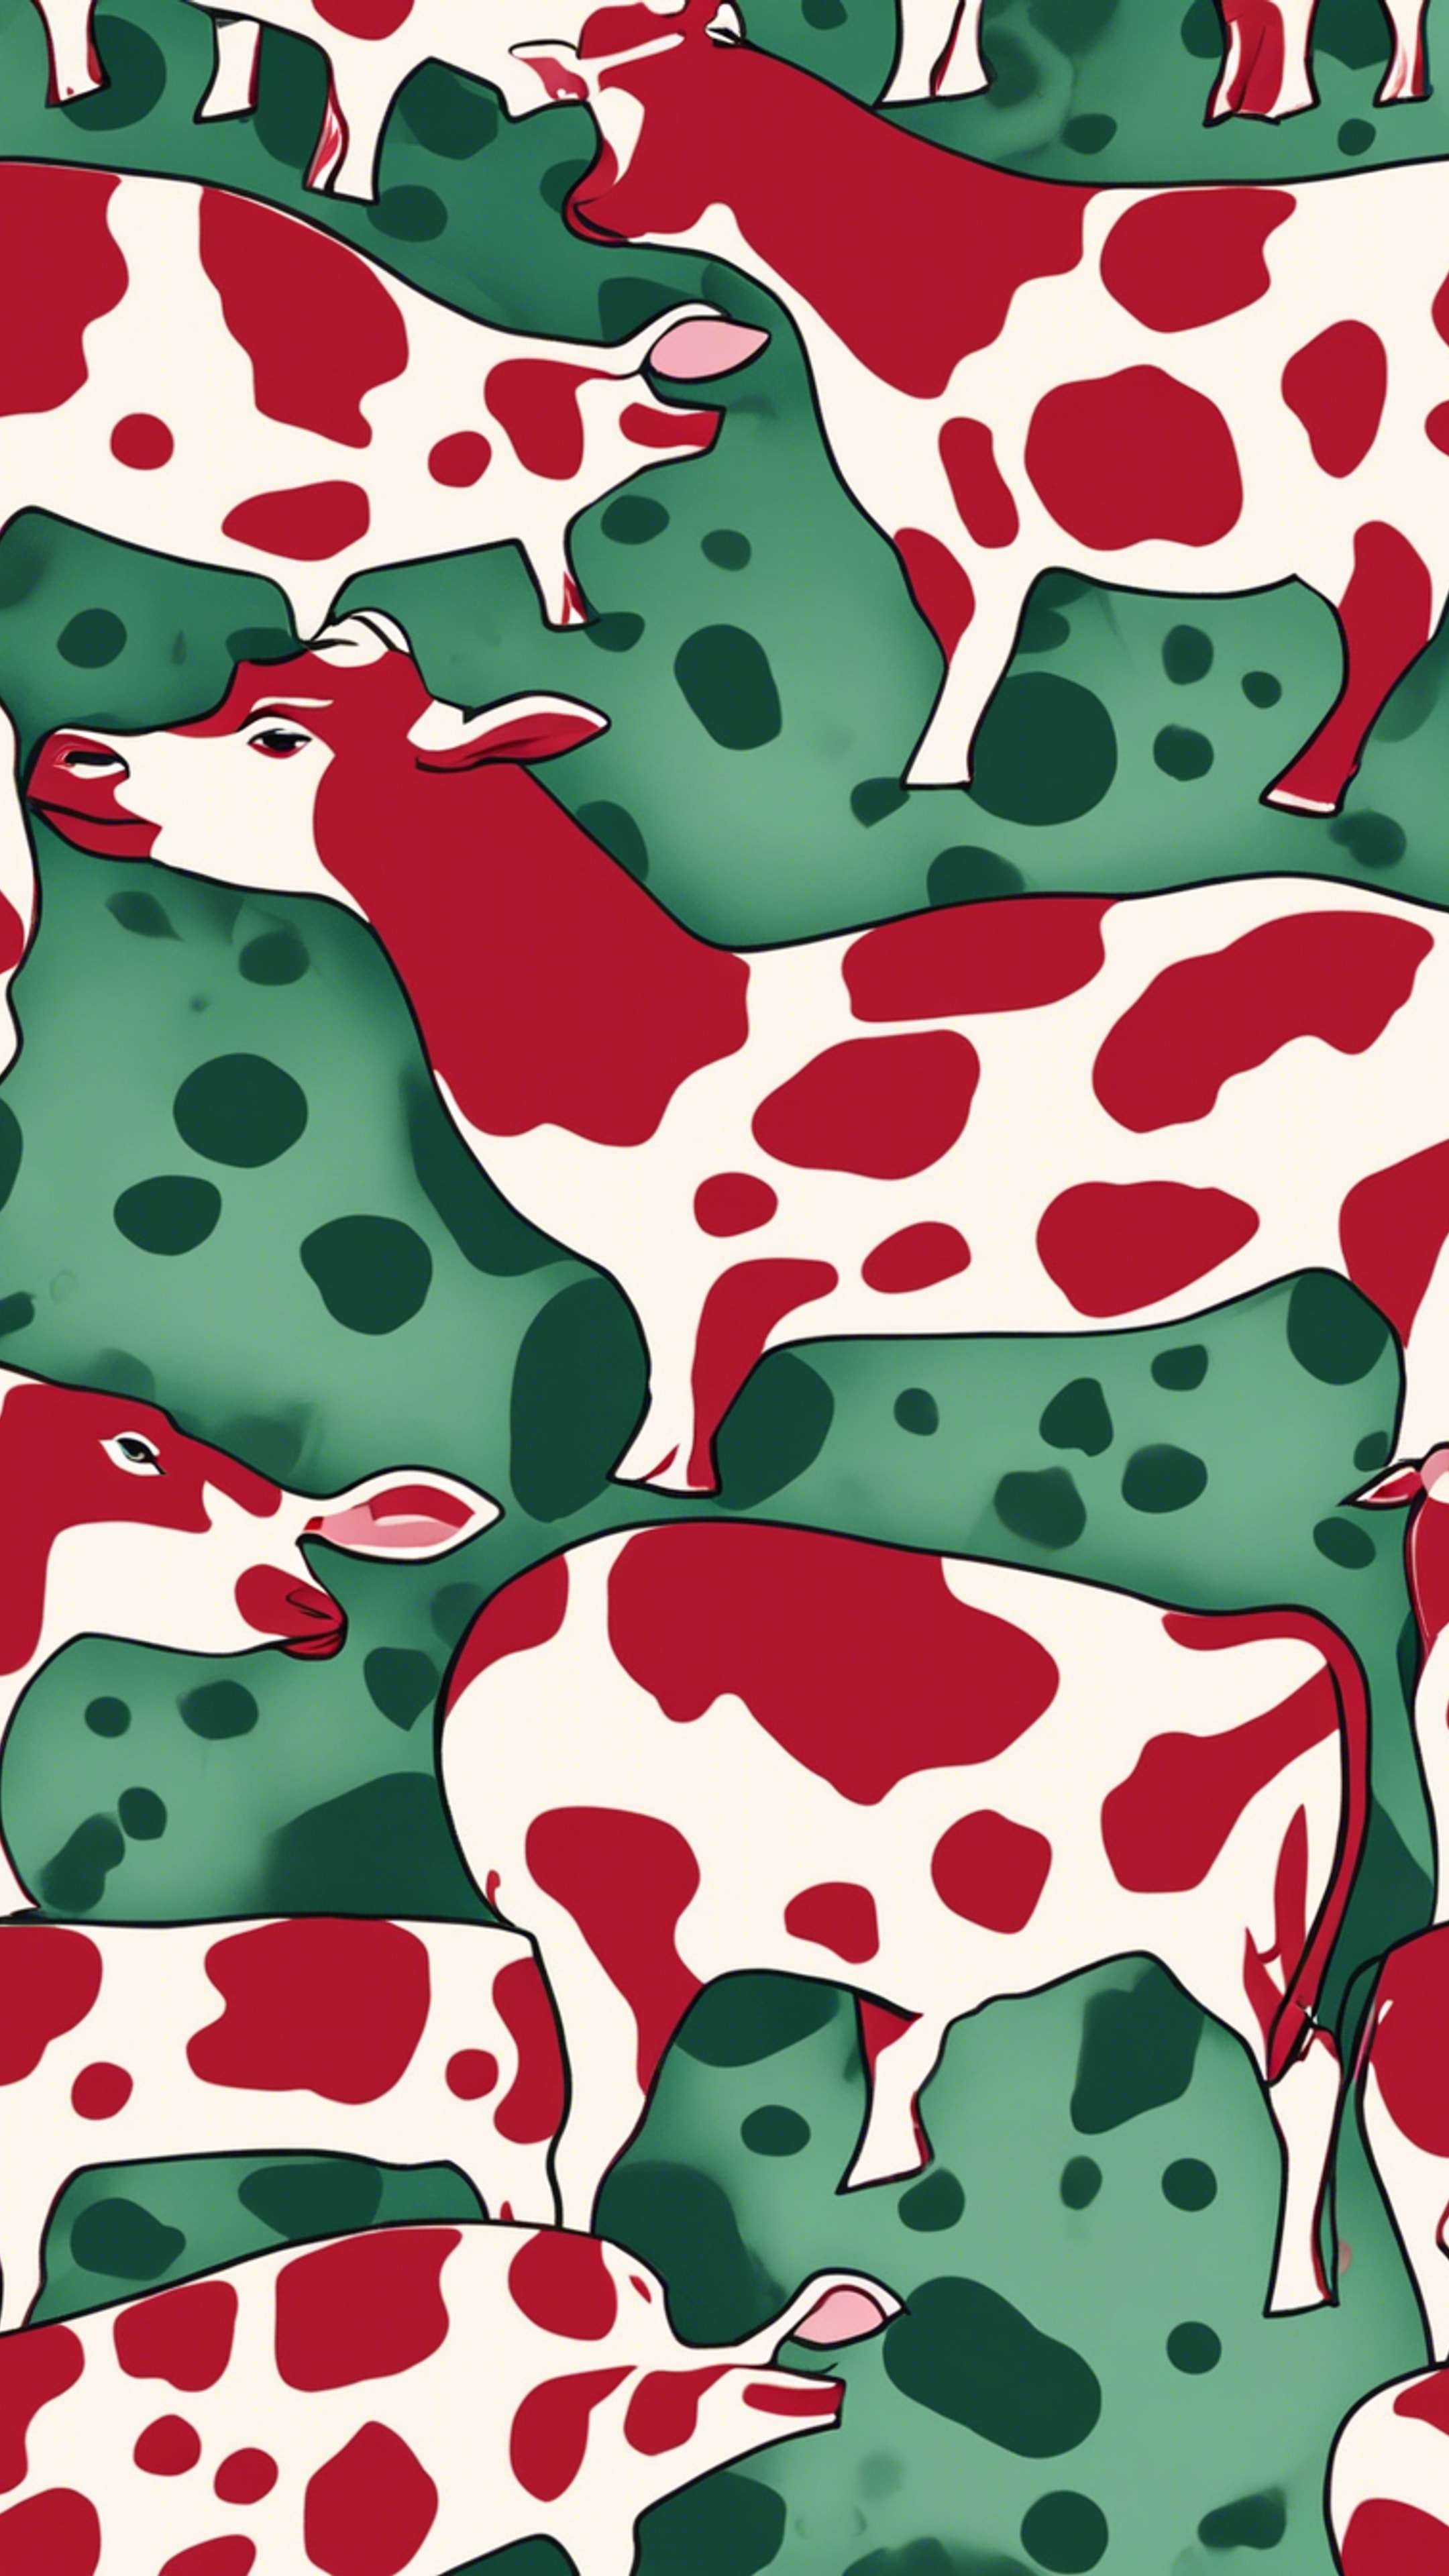 A dynamic, textured pattern of red and green cow spots. 牆紙[159333102a774de6a0e2]